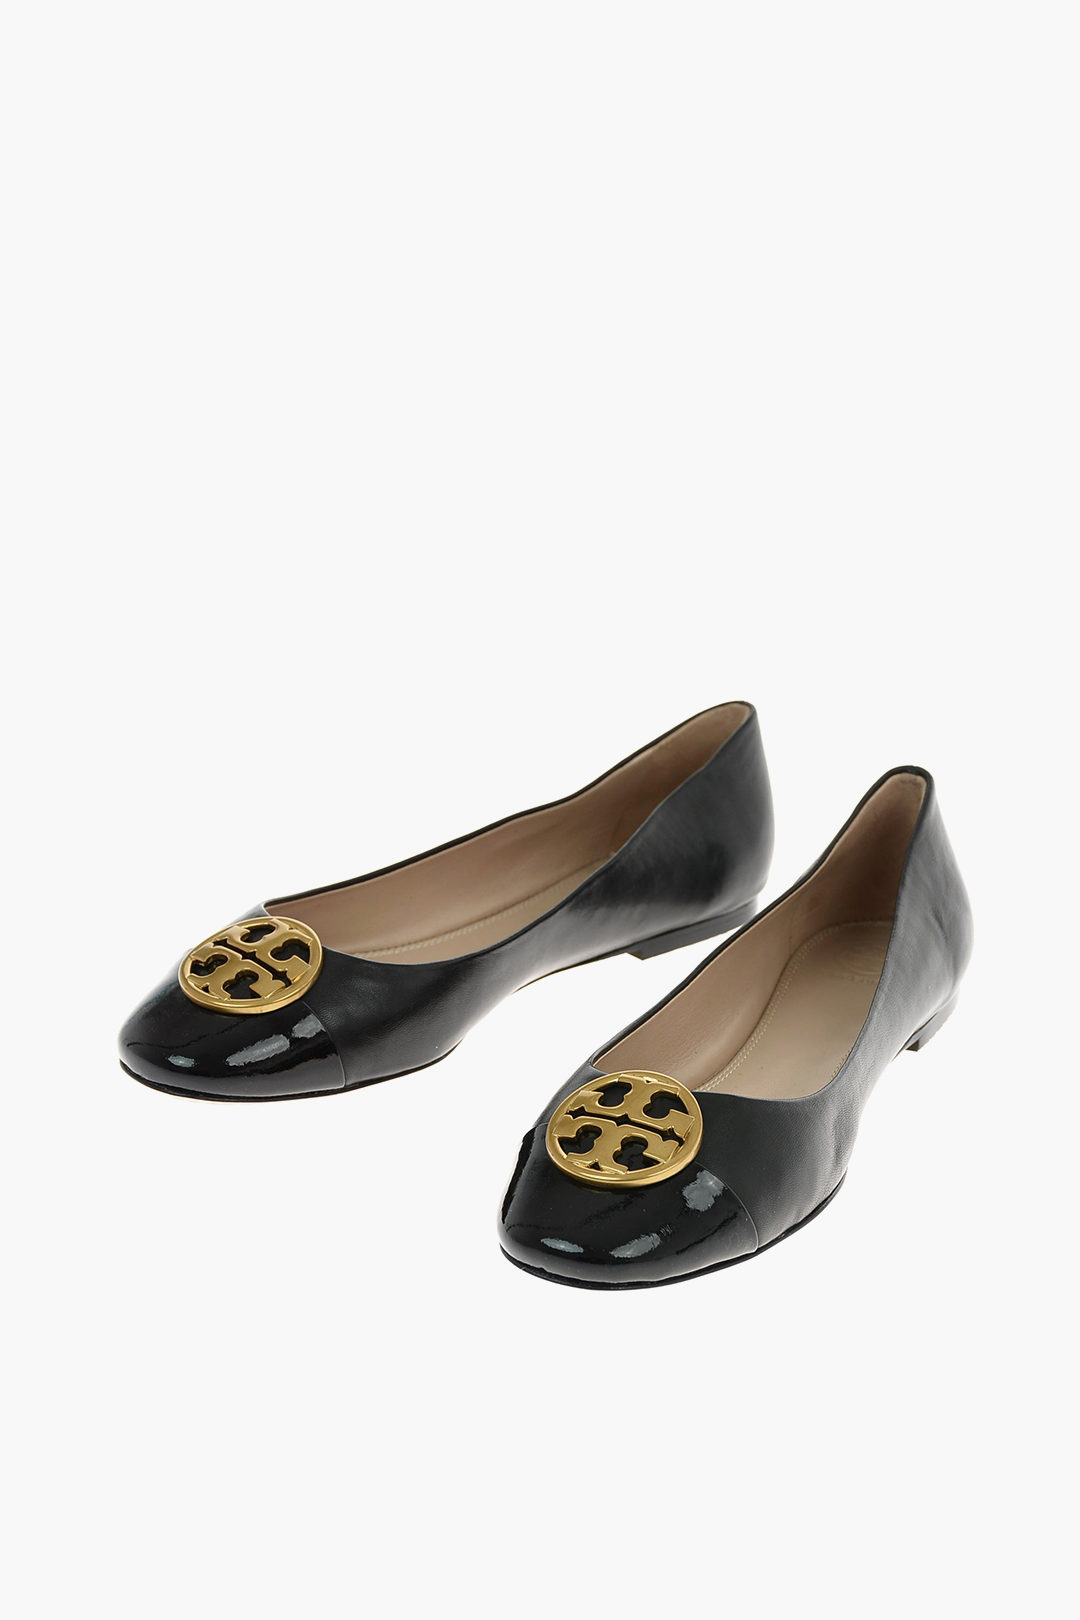 Tory Burch leather Ballet flats women - Glamood Outlet